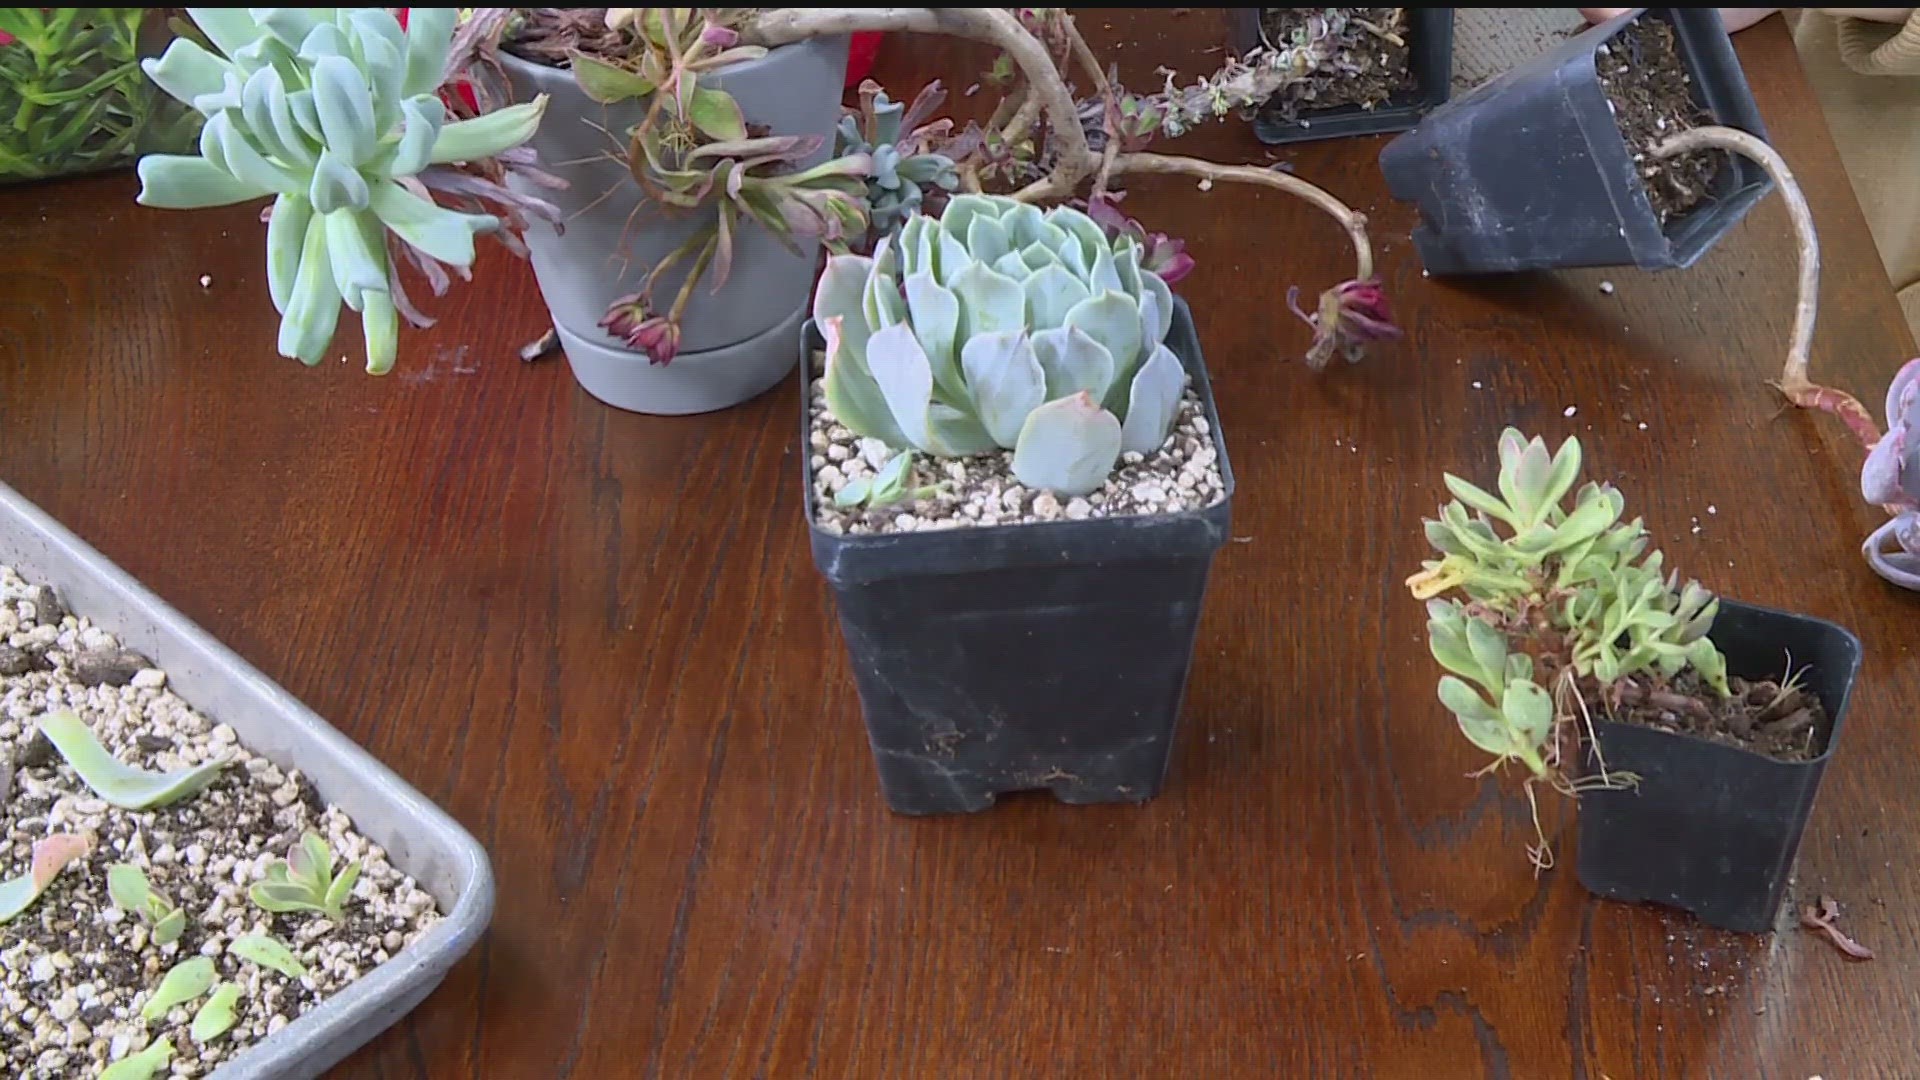 After a long winter inside, maybe some of your succulents look horrible. Don’t give up on them! Rejuvenating your leggy and stretched-out succulents is so easy.